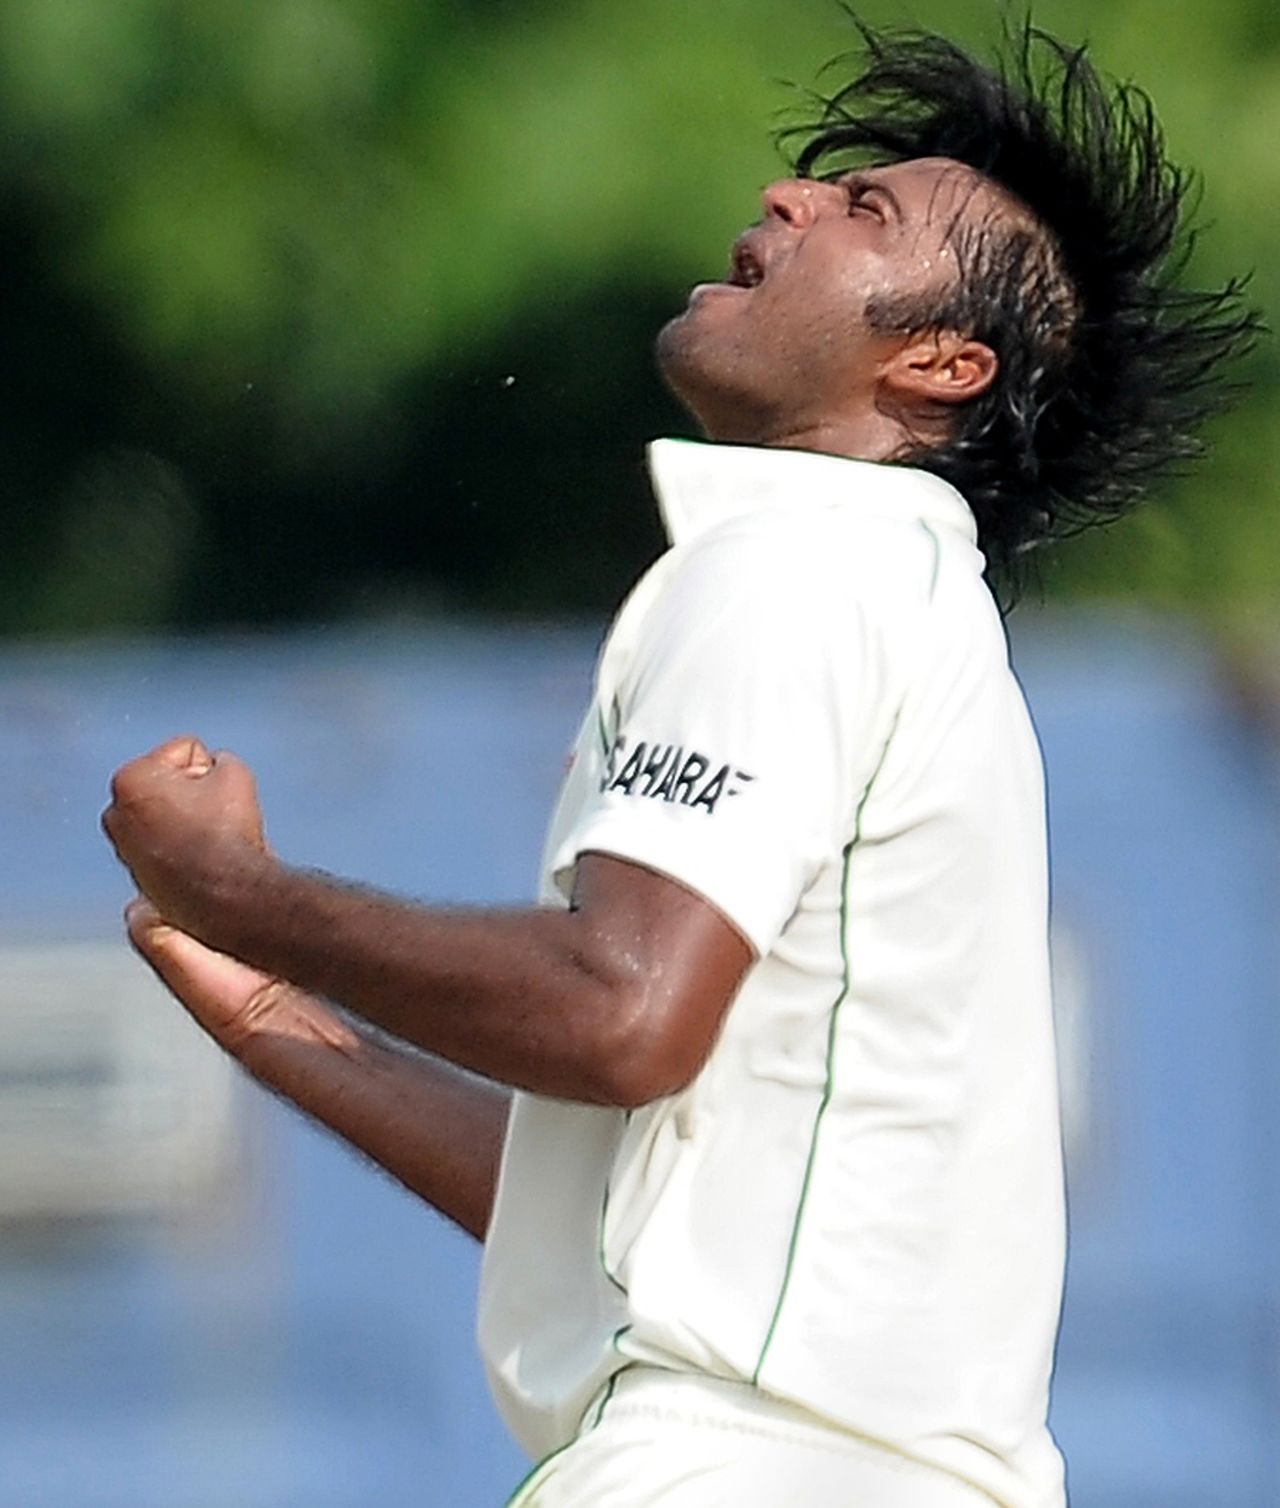 Shahdat Hossain reacts after getting opener Dimuth Karunaratne out, Sri Lanka v Bangladesh, 1st Test, Galle, 4th day, March 11, 2013